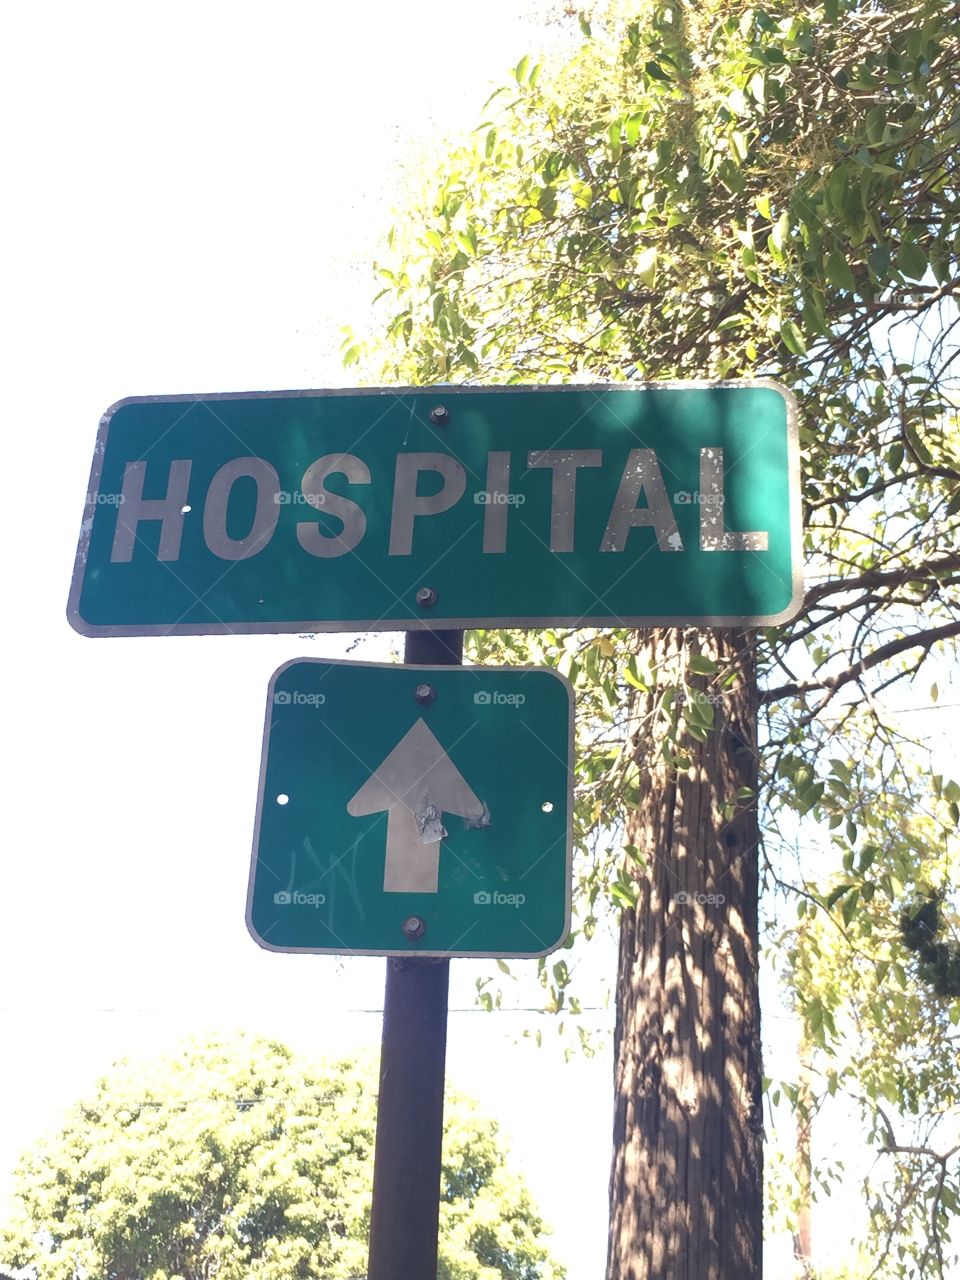 HOSPITAL Sign. A directional sign for the local hospital in Berkeley, CA.